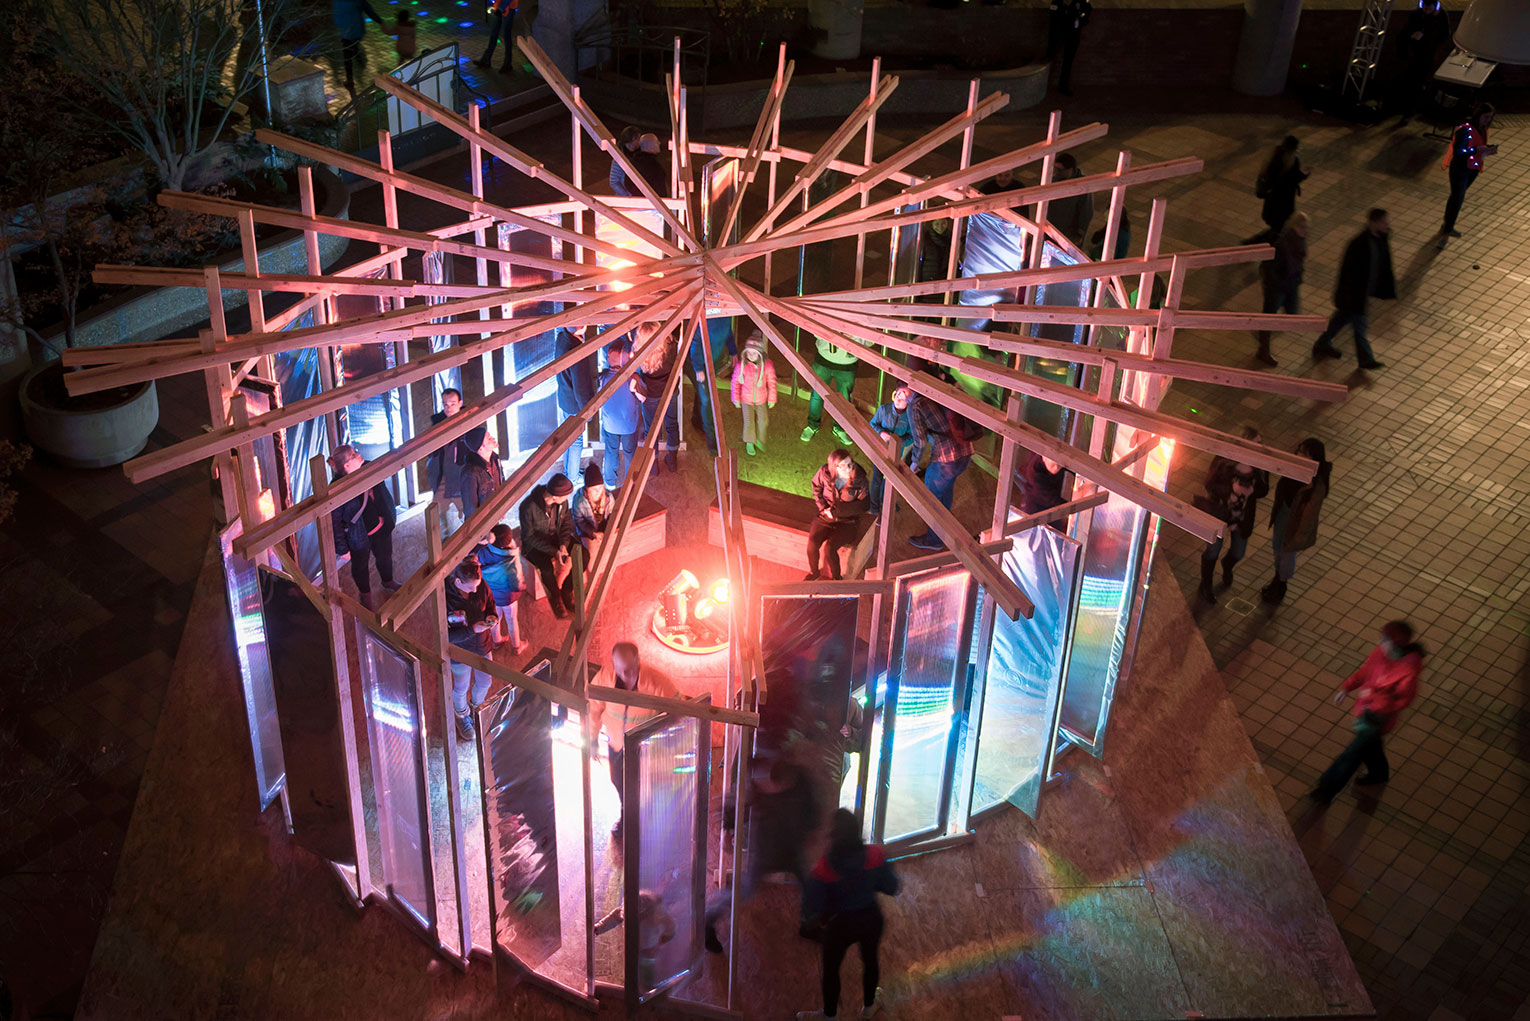 Winter Lights Festival: People to People Through Light. Aerial vew of multi-colored interactive light display topped with fanned out wooden beams. Image shows people moving in and through the structure.